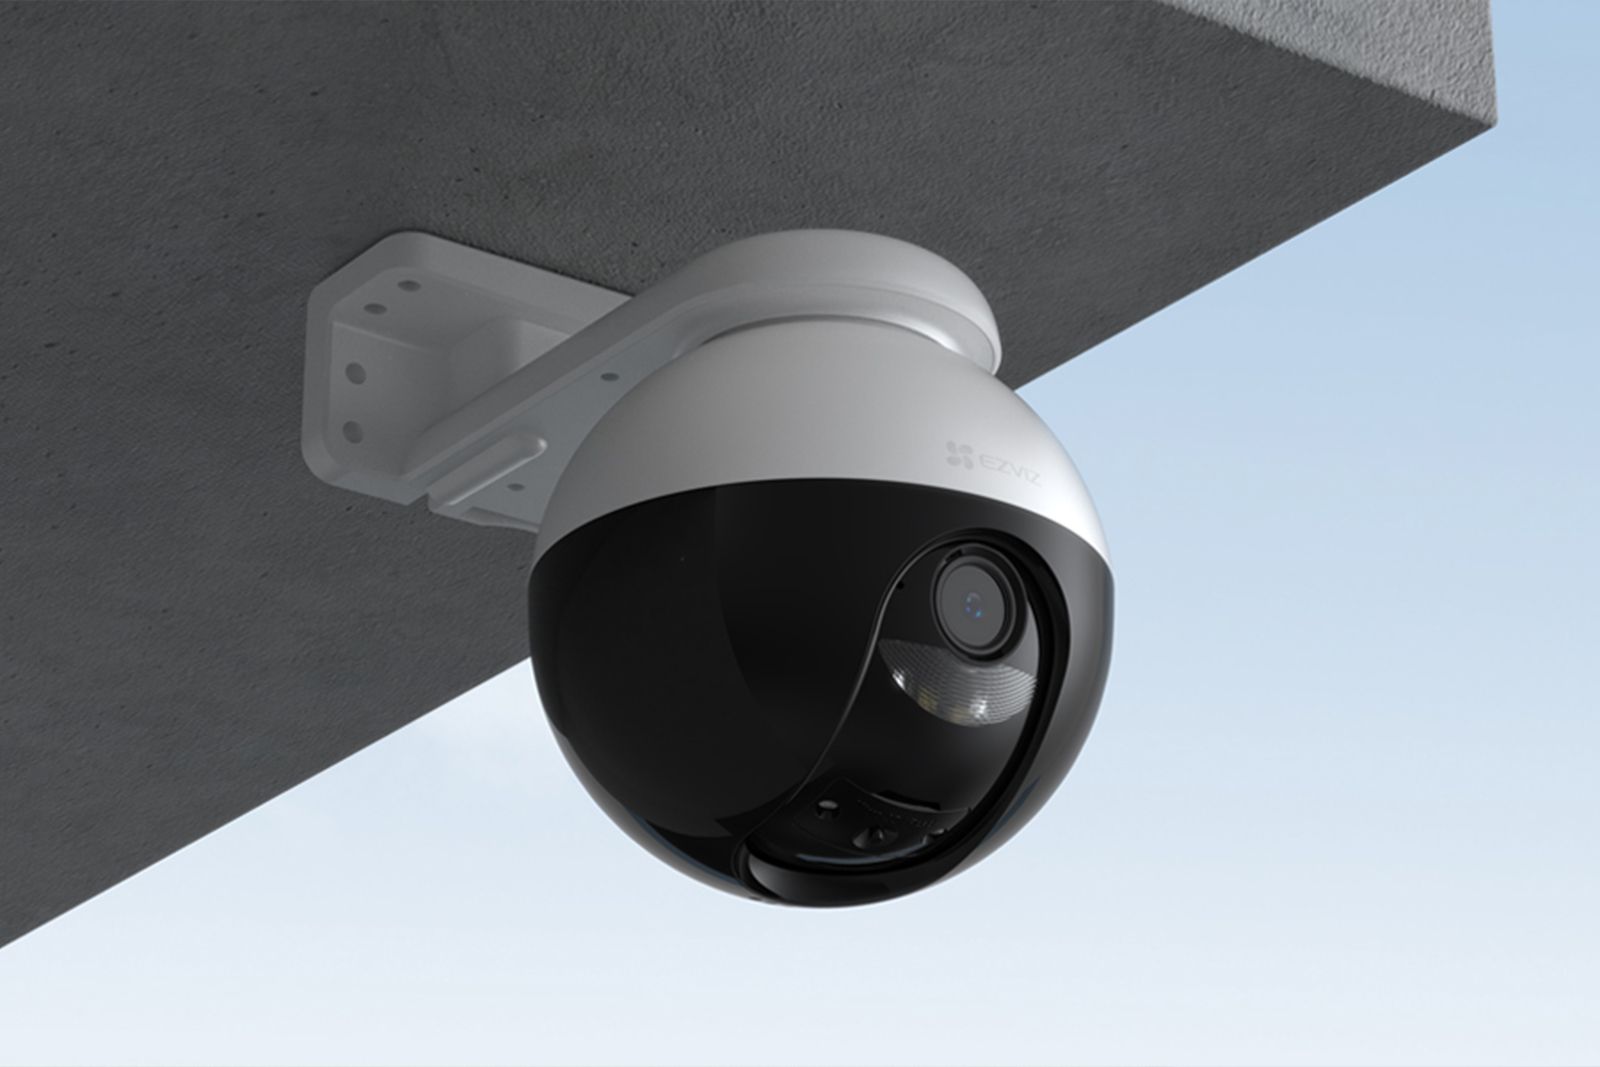 Eliminate all blind spots and monitor every inch of your home with the EZVIZ C8W Pro pan-and-tilt camera photo 2